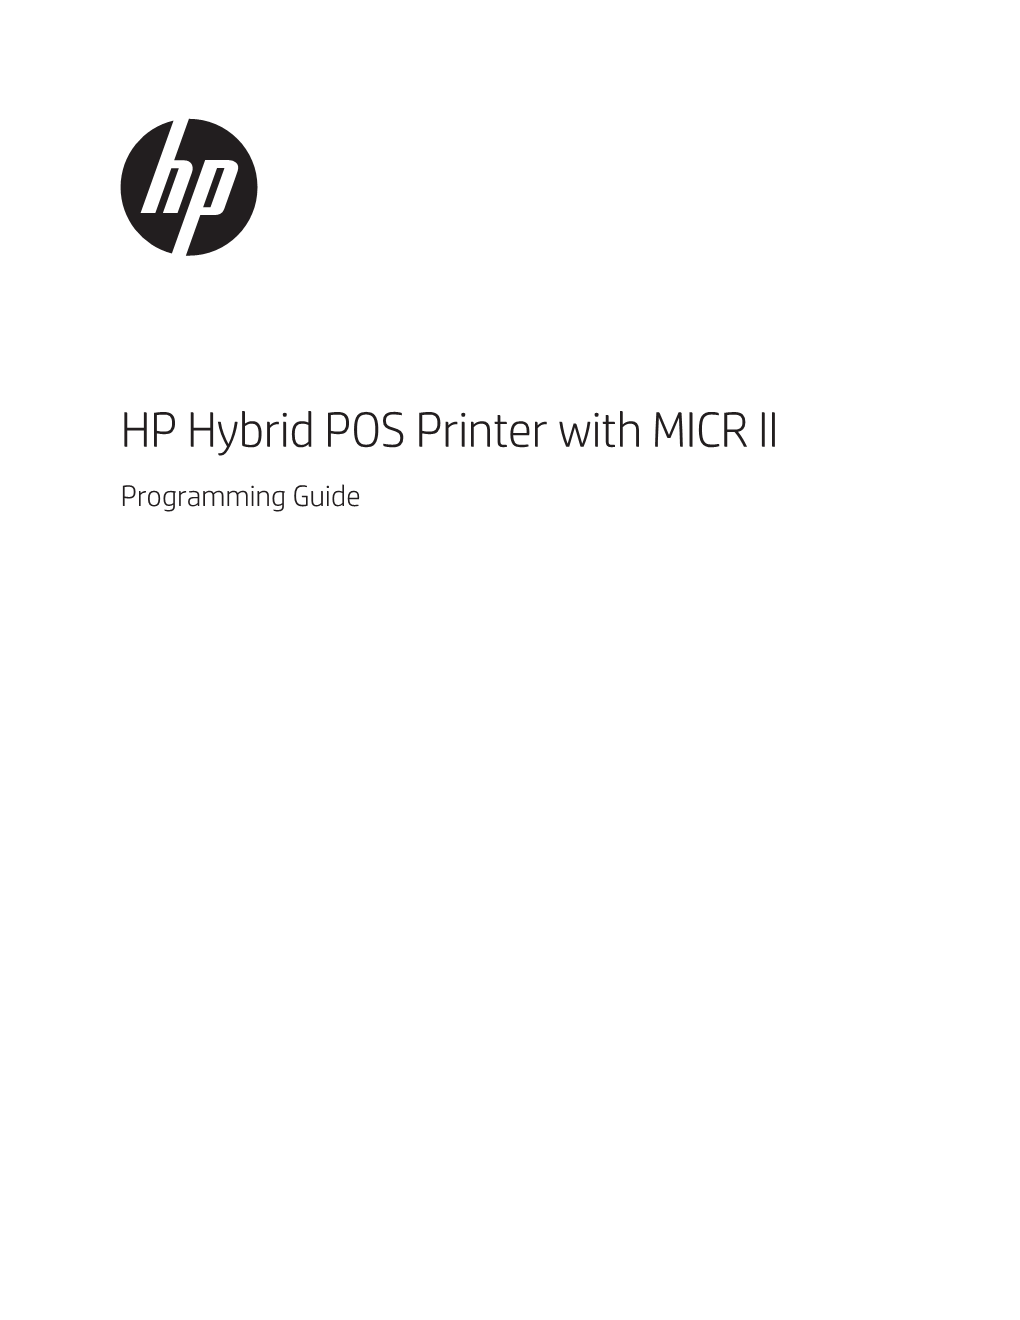 HP Hybrid POS Printer with MICR II Programming Guide Contents I